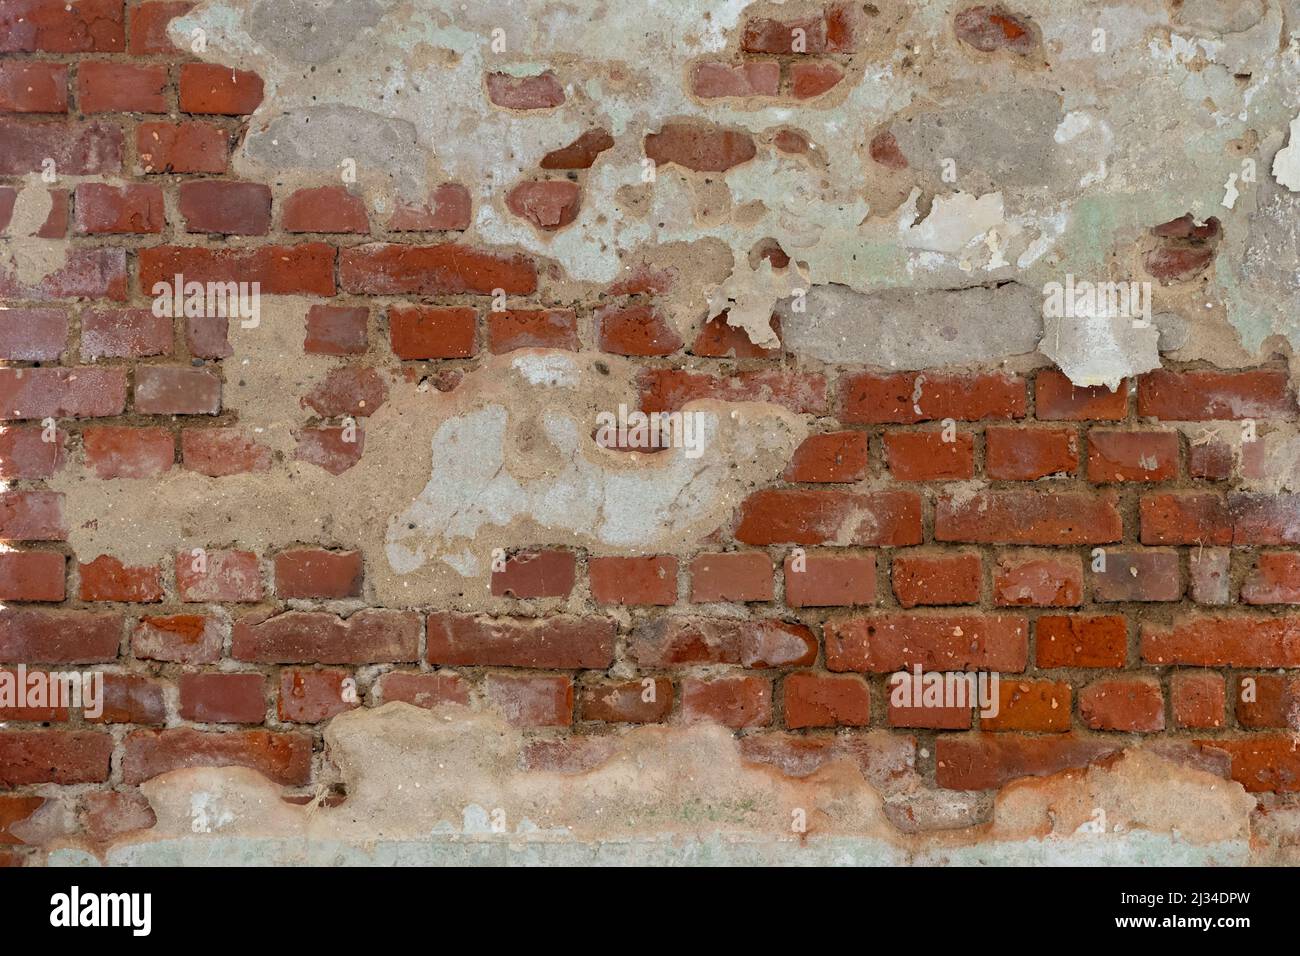 Broken red brick wall background texture with damaged plaster parts on it. Dirty rough surface of a building facade. Pattern of small weathered bricks Stock Photo